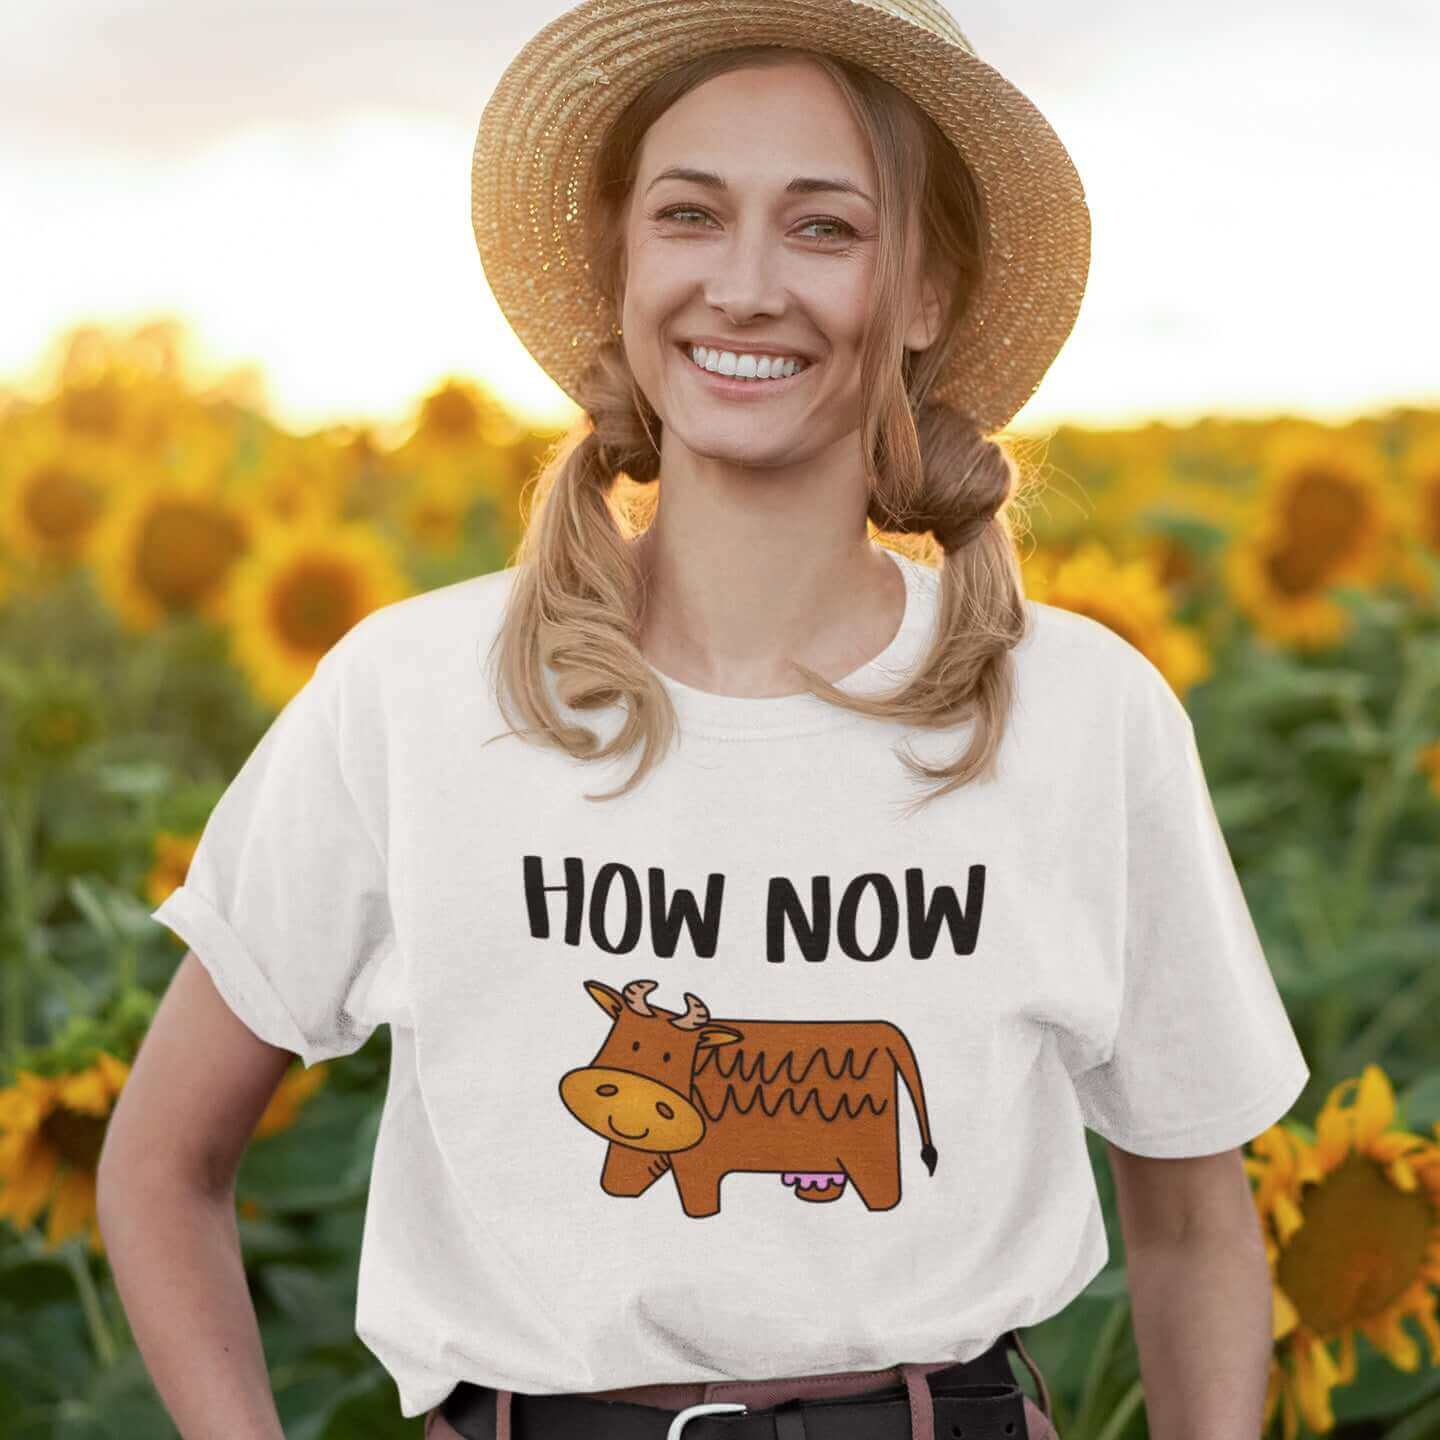 Woman standing in a field of sunflowers wearing a white t-shirt with the words How now and an image of a brown cow printed on the front.